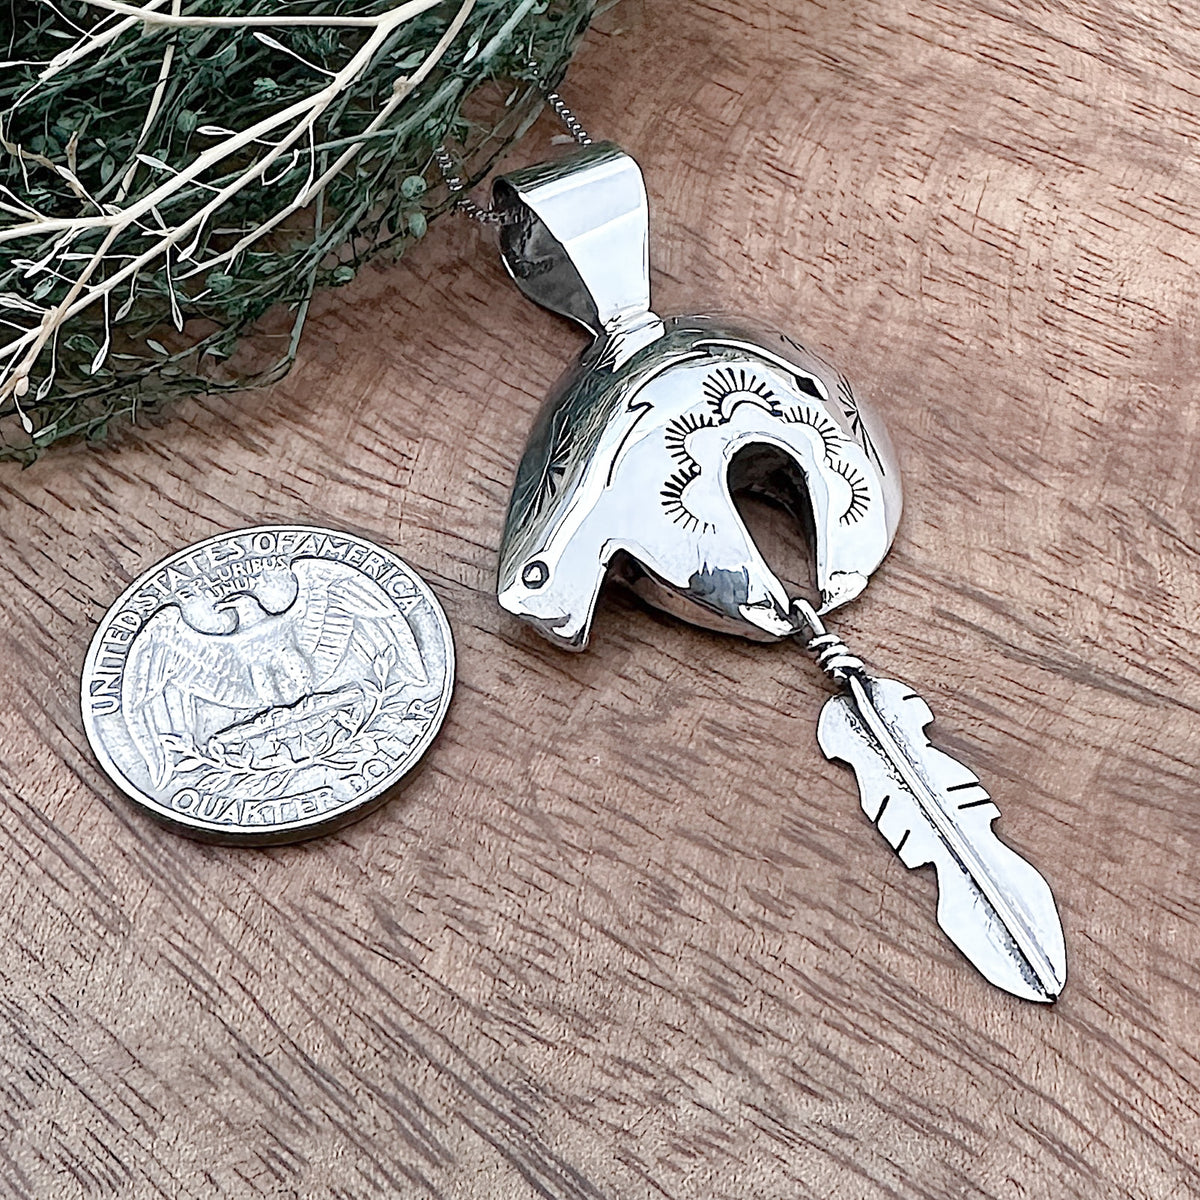 Comparison shot of a US quarter coin and a pendant that is shaped like a bear and feather